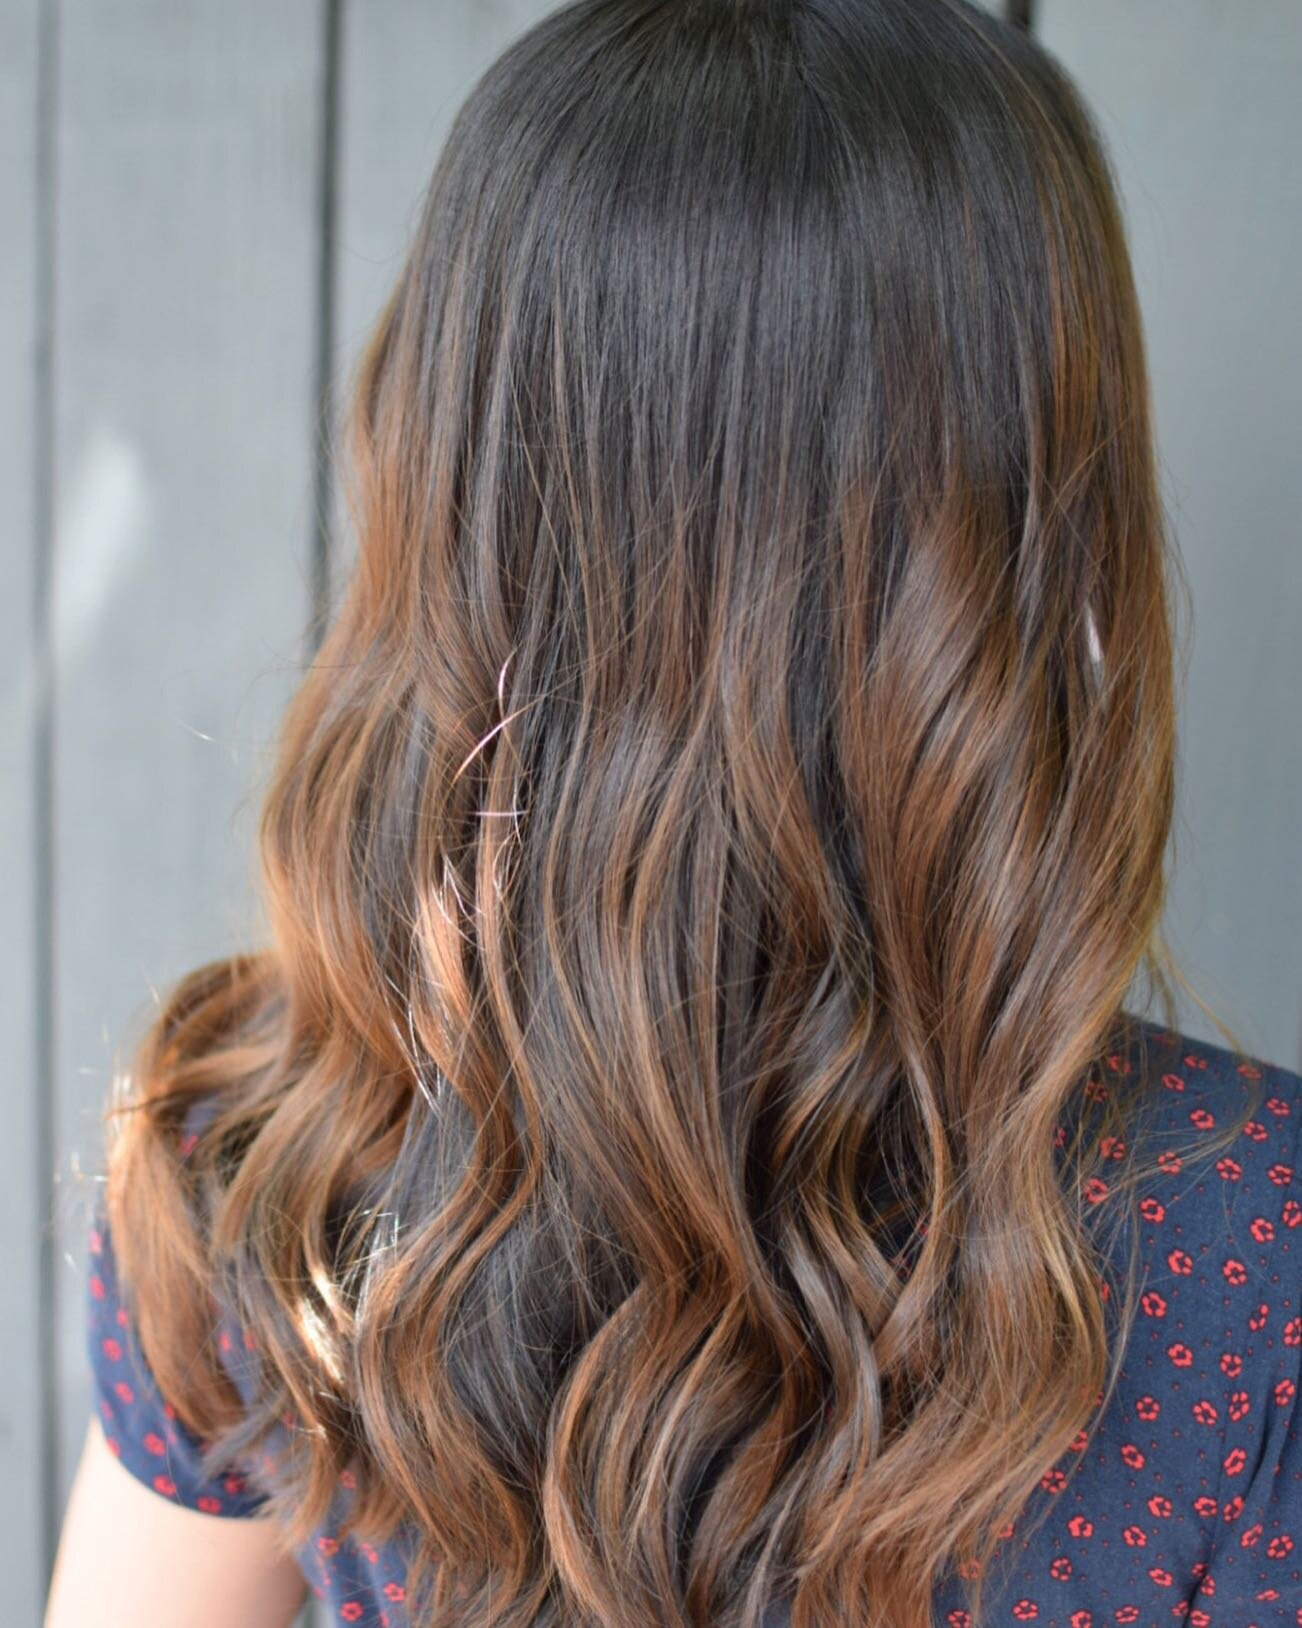 I know we&rsquo;re in Fool&rsquo;s Fall, but are you ready for warm tones, sweaters, and crunchy leaves? 🍁

Balayage for Elena by Rising Stylist Kandis @kandisdoeshair_